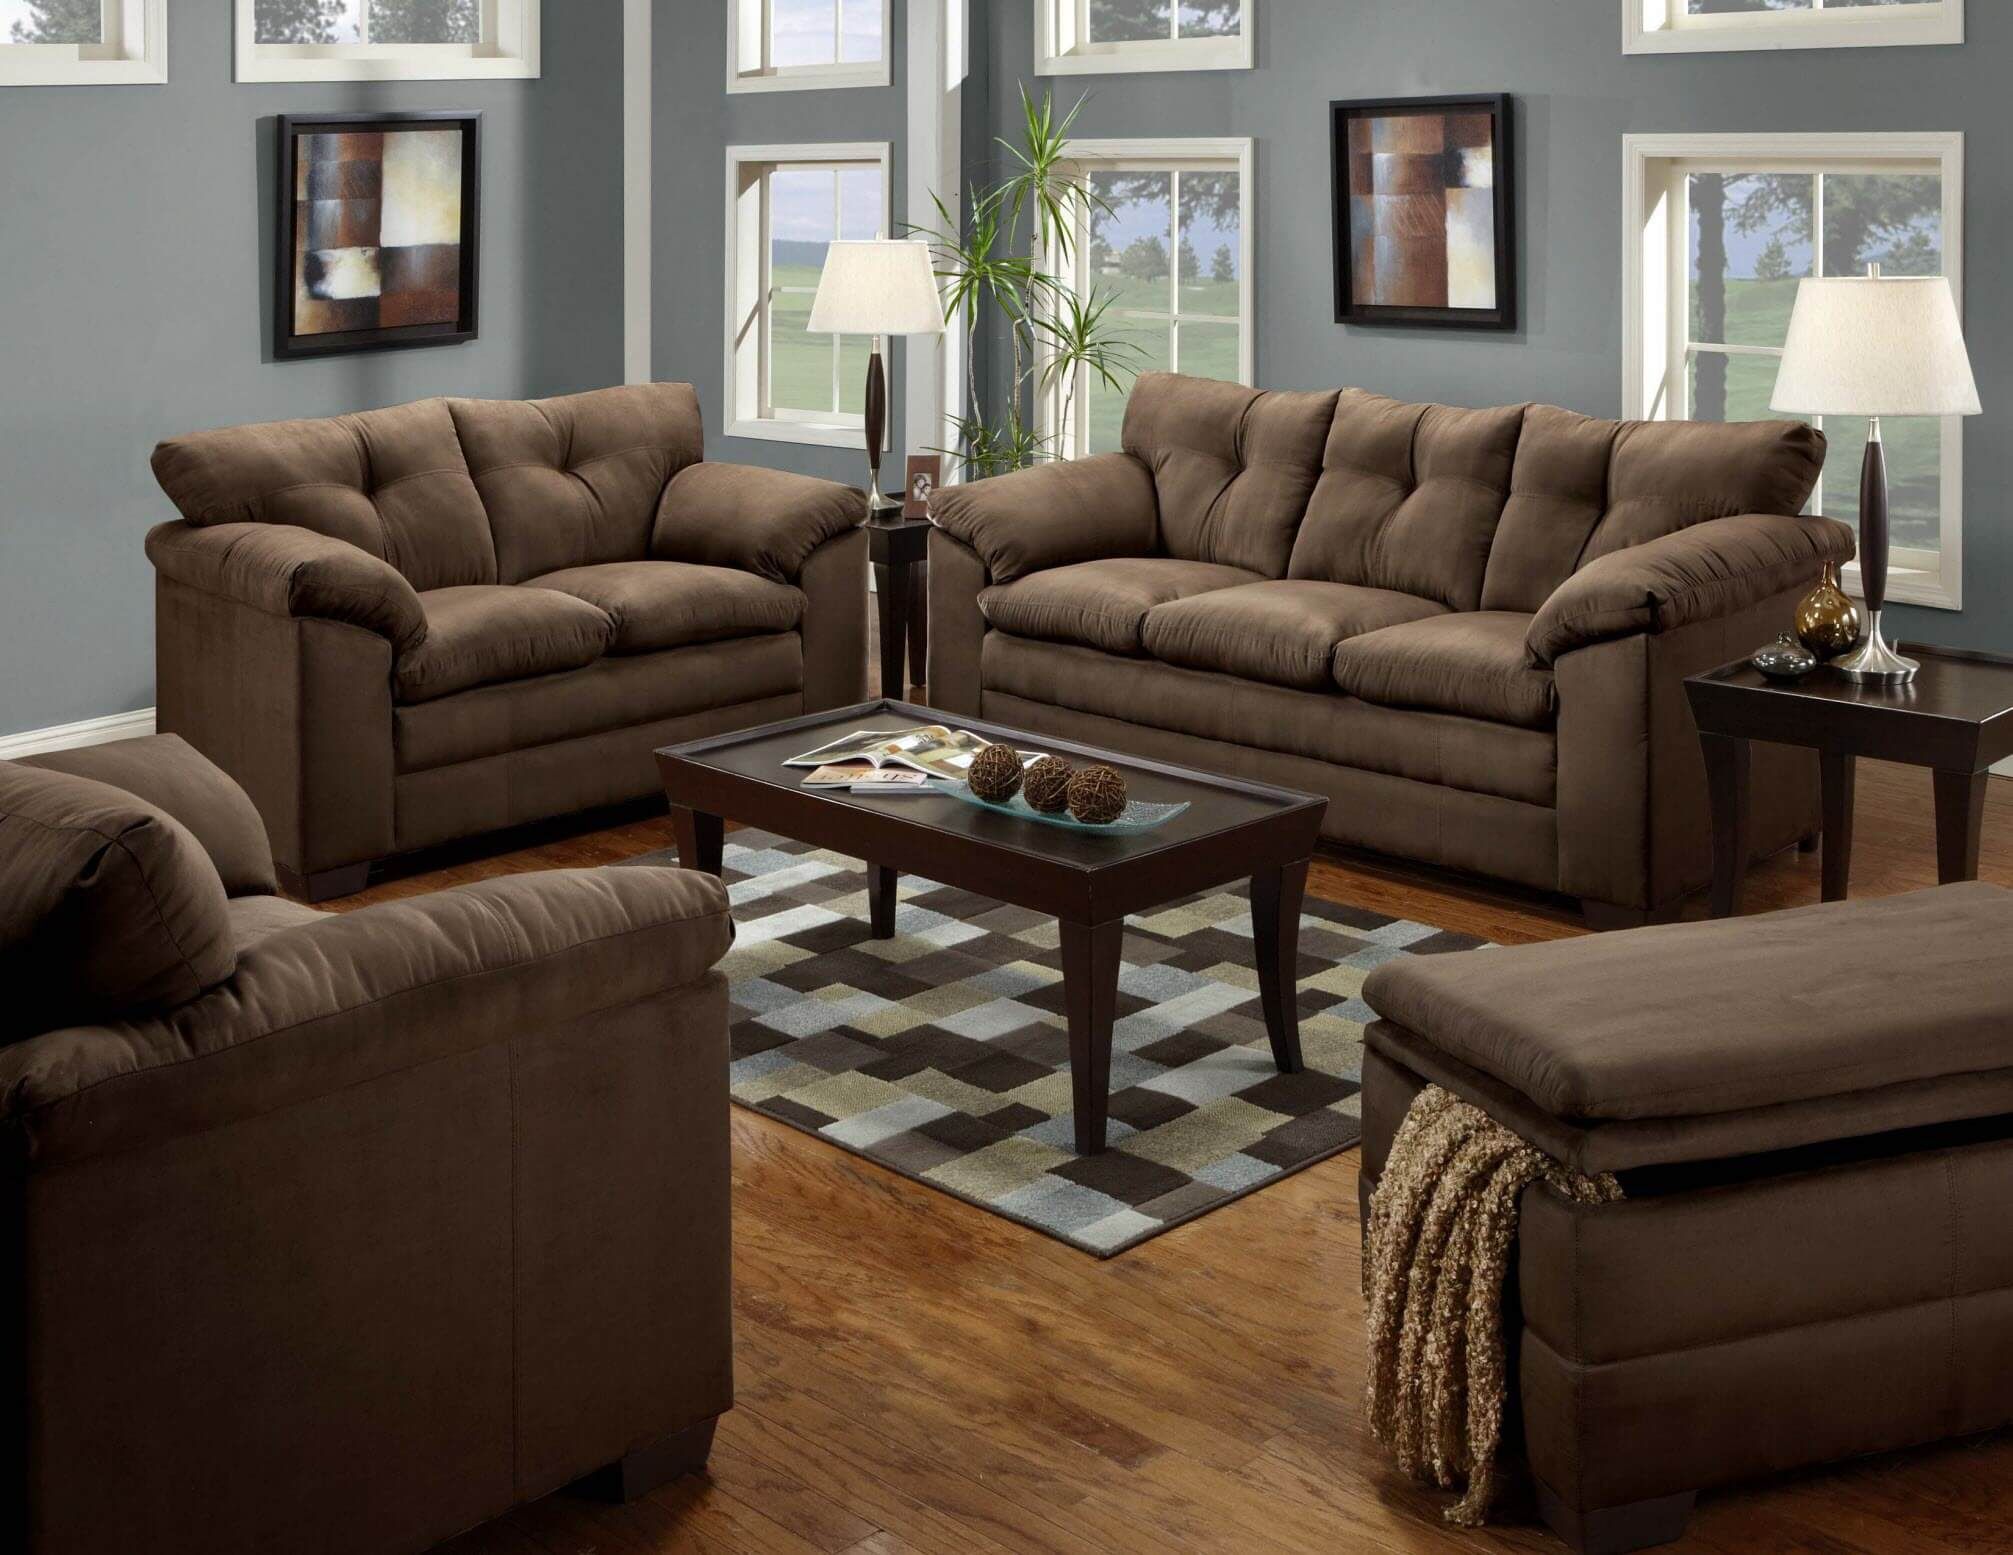 Bulldozer Chocolate Sofa And Loveseat | Fabric Living Room Intended For Brown Sofa Chairs (View 12 of 15)